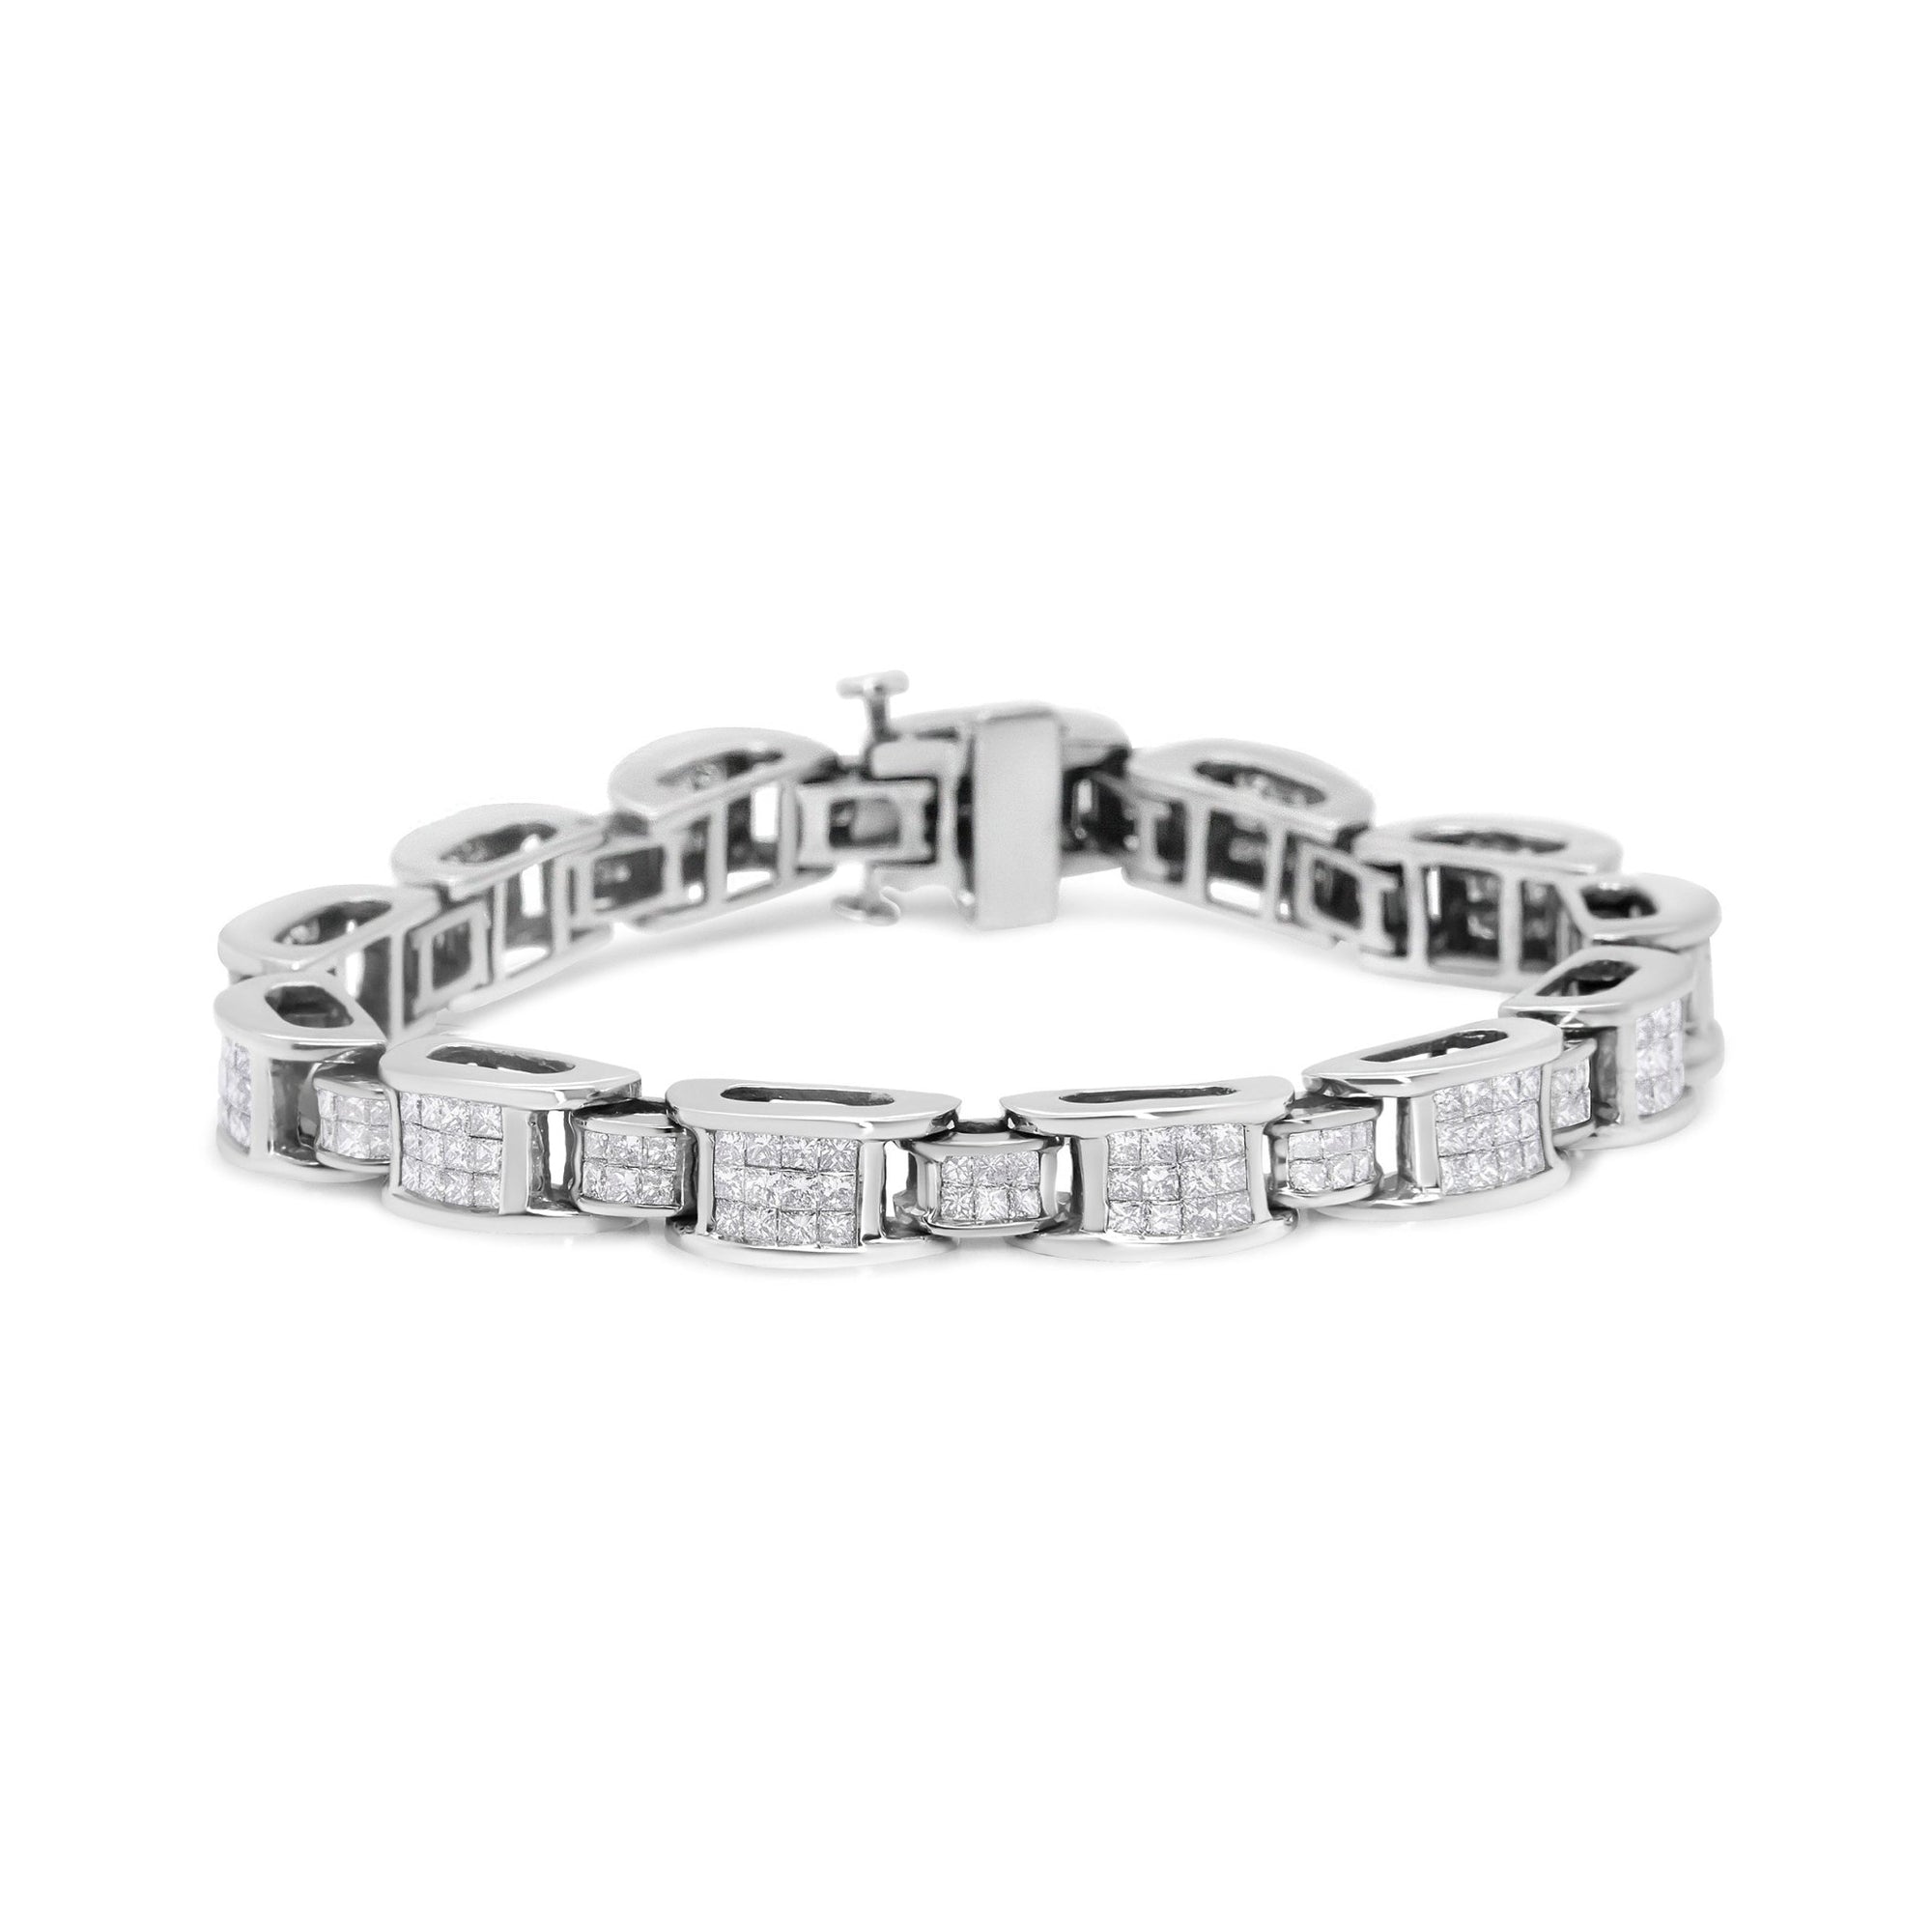 14K White Gold 5.0 Cttw Princess Cut Diamond Invisible Set Alternating Size D Shaped Links Tennis Bracelet (H-I Color, SI2-I1 Clarity) - 7” - LinkagejewelrydesignLinkagejewelrydesign